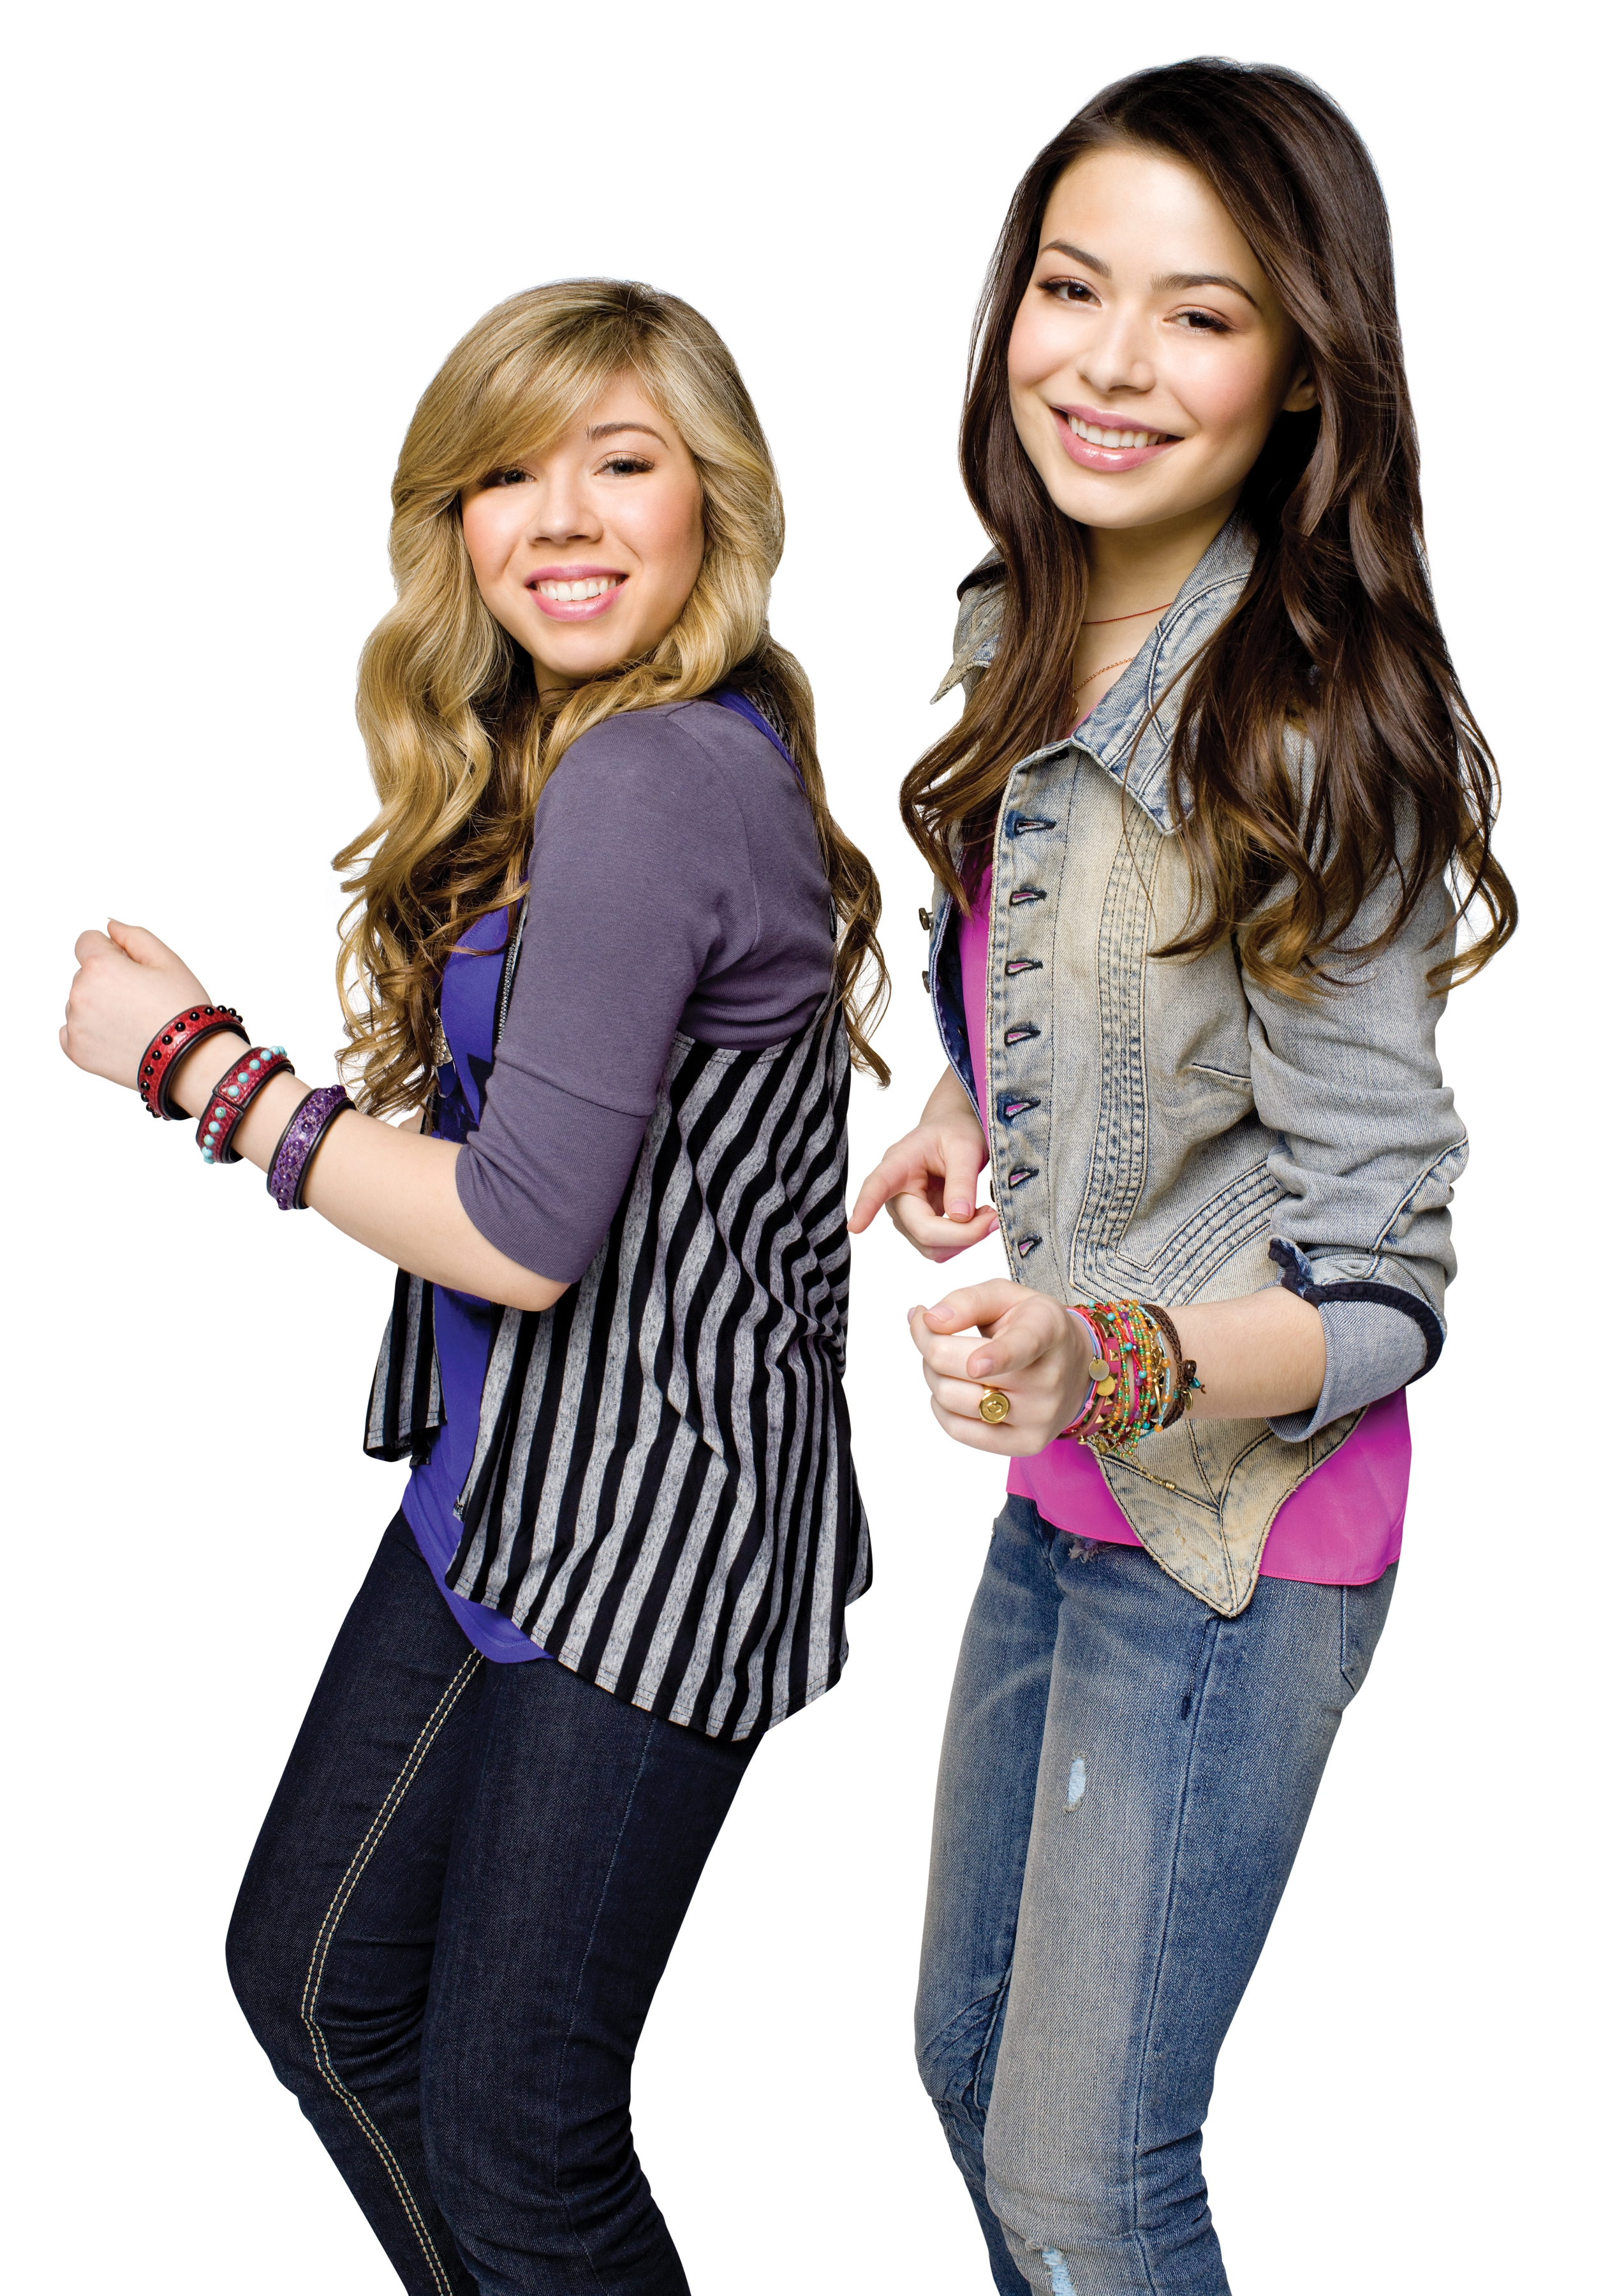 Jennette McCurdy in iCarly